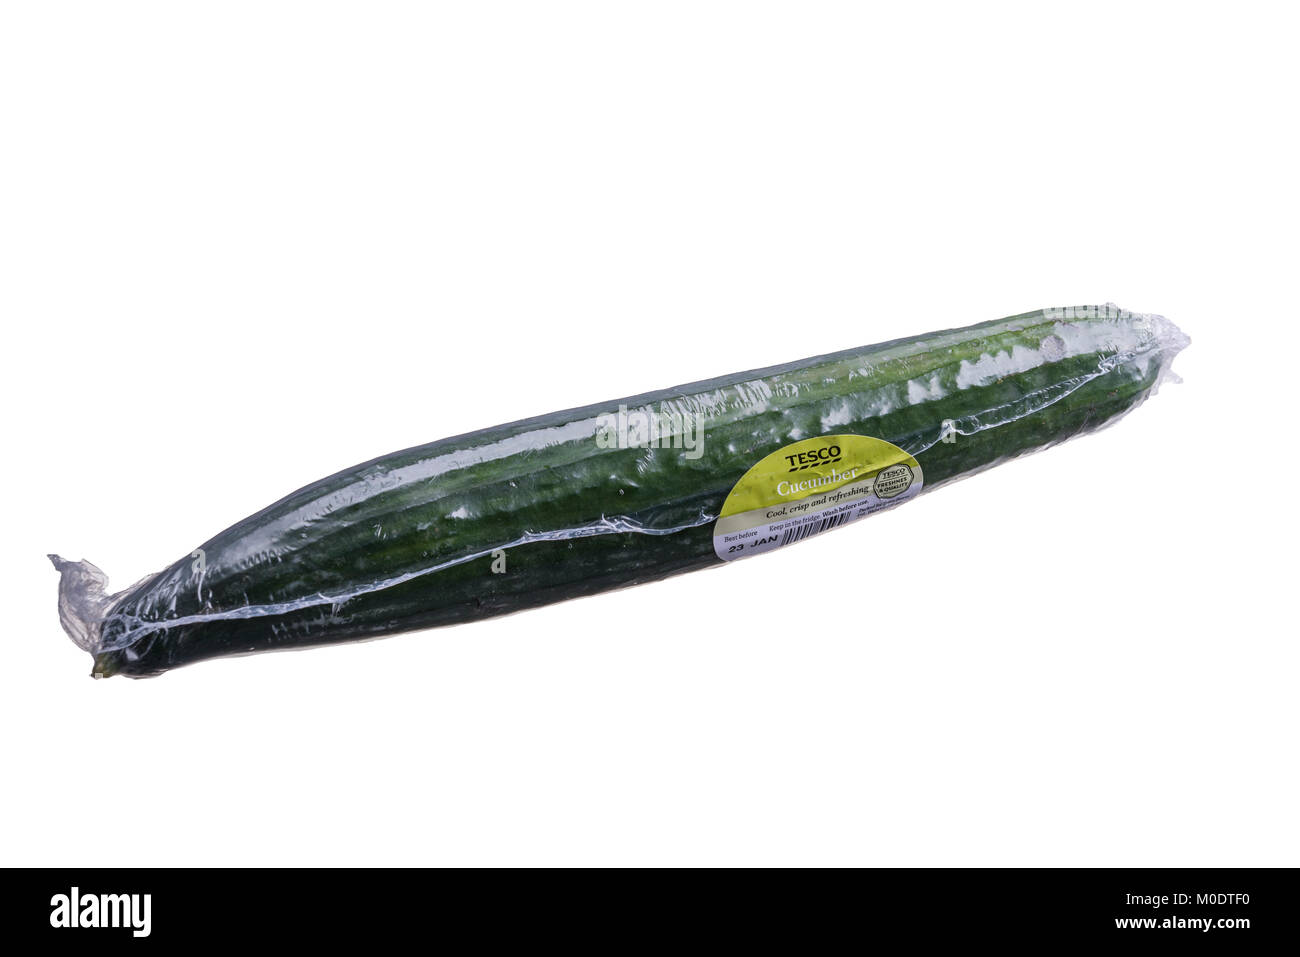 Cucumber wrapped in plastic, supermarket plastic packaging. Stock Photo